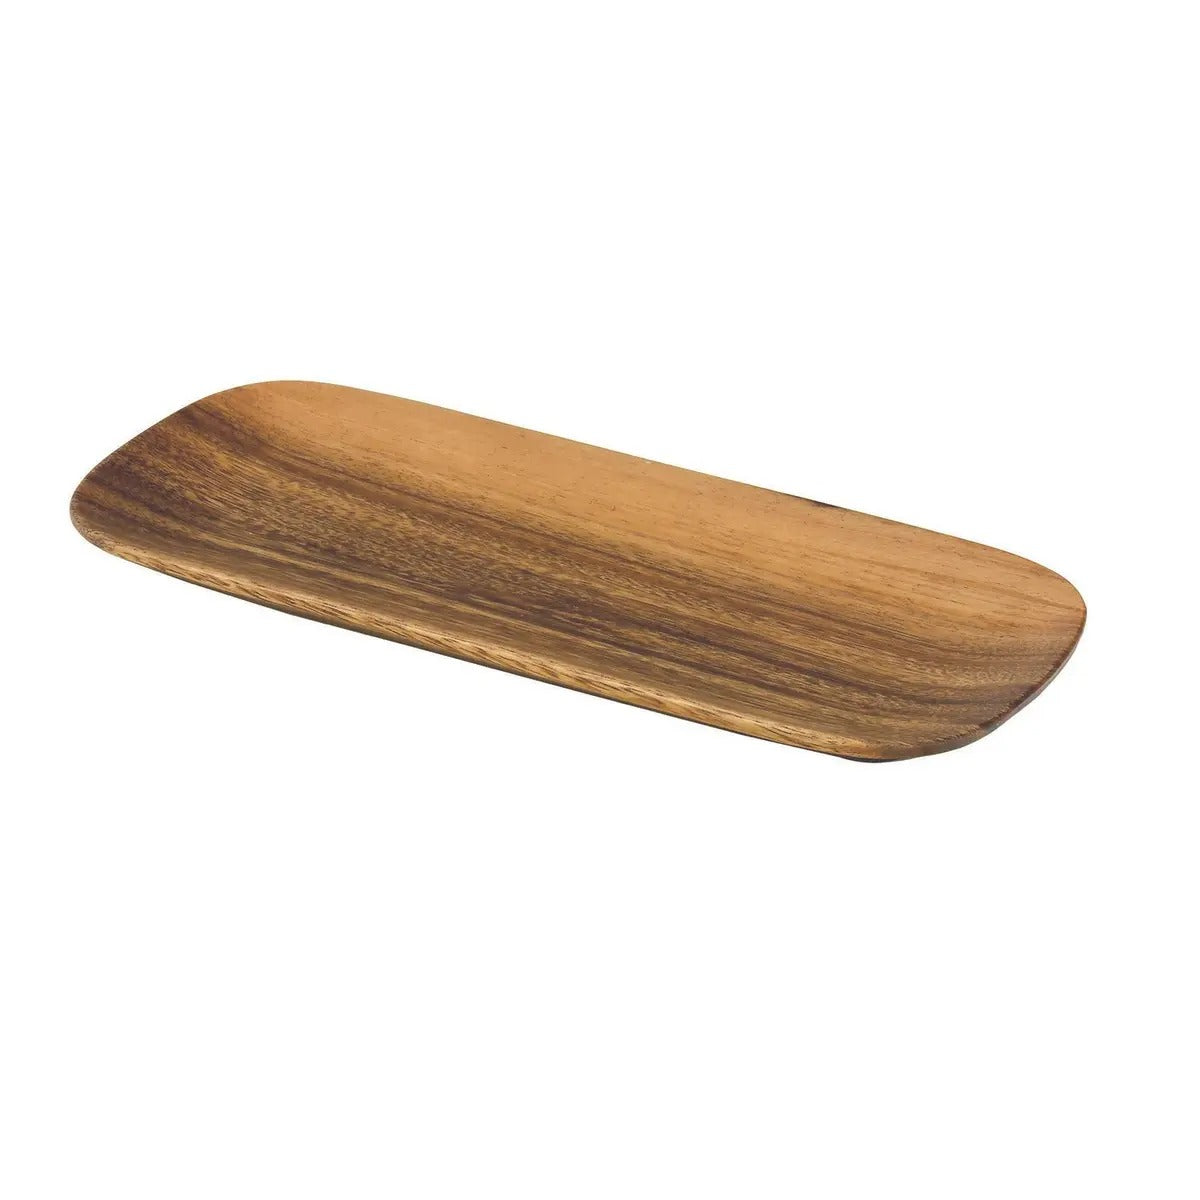 Acacia Oval Charcuterie and Serving Tray, 12” x 5” x .75”